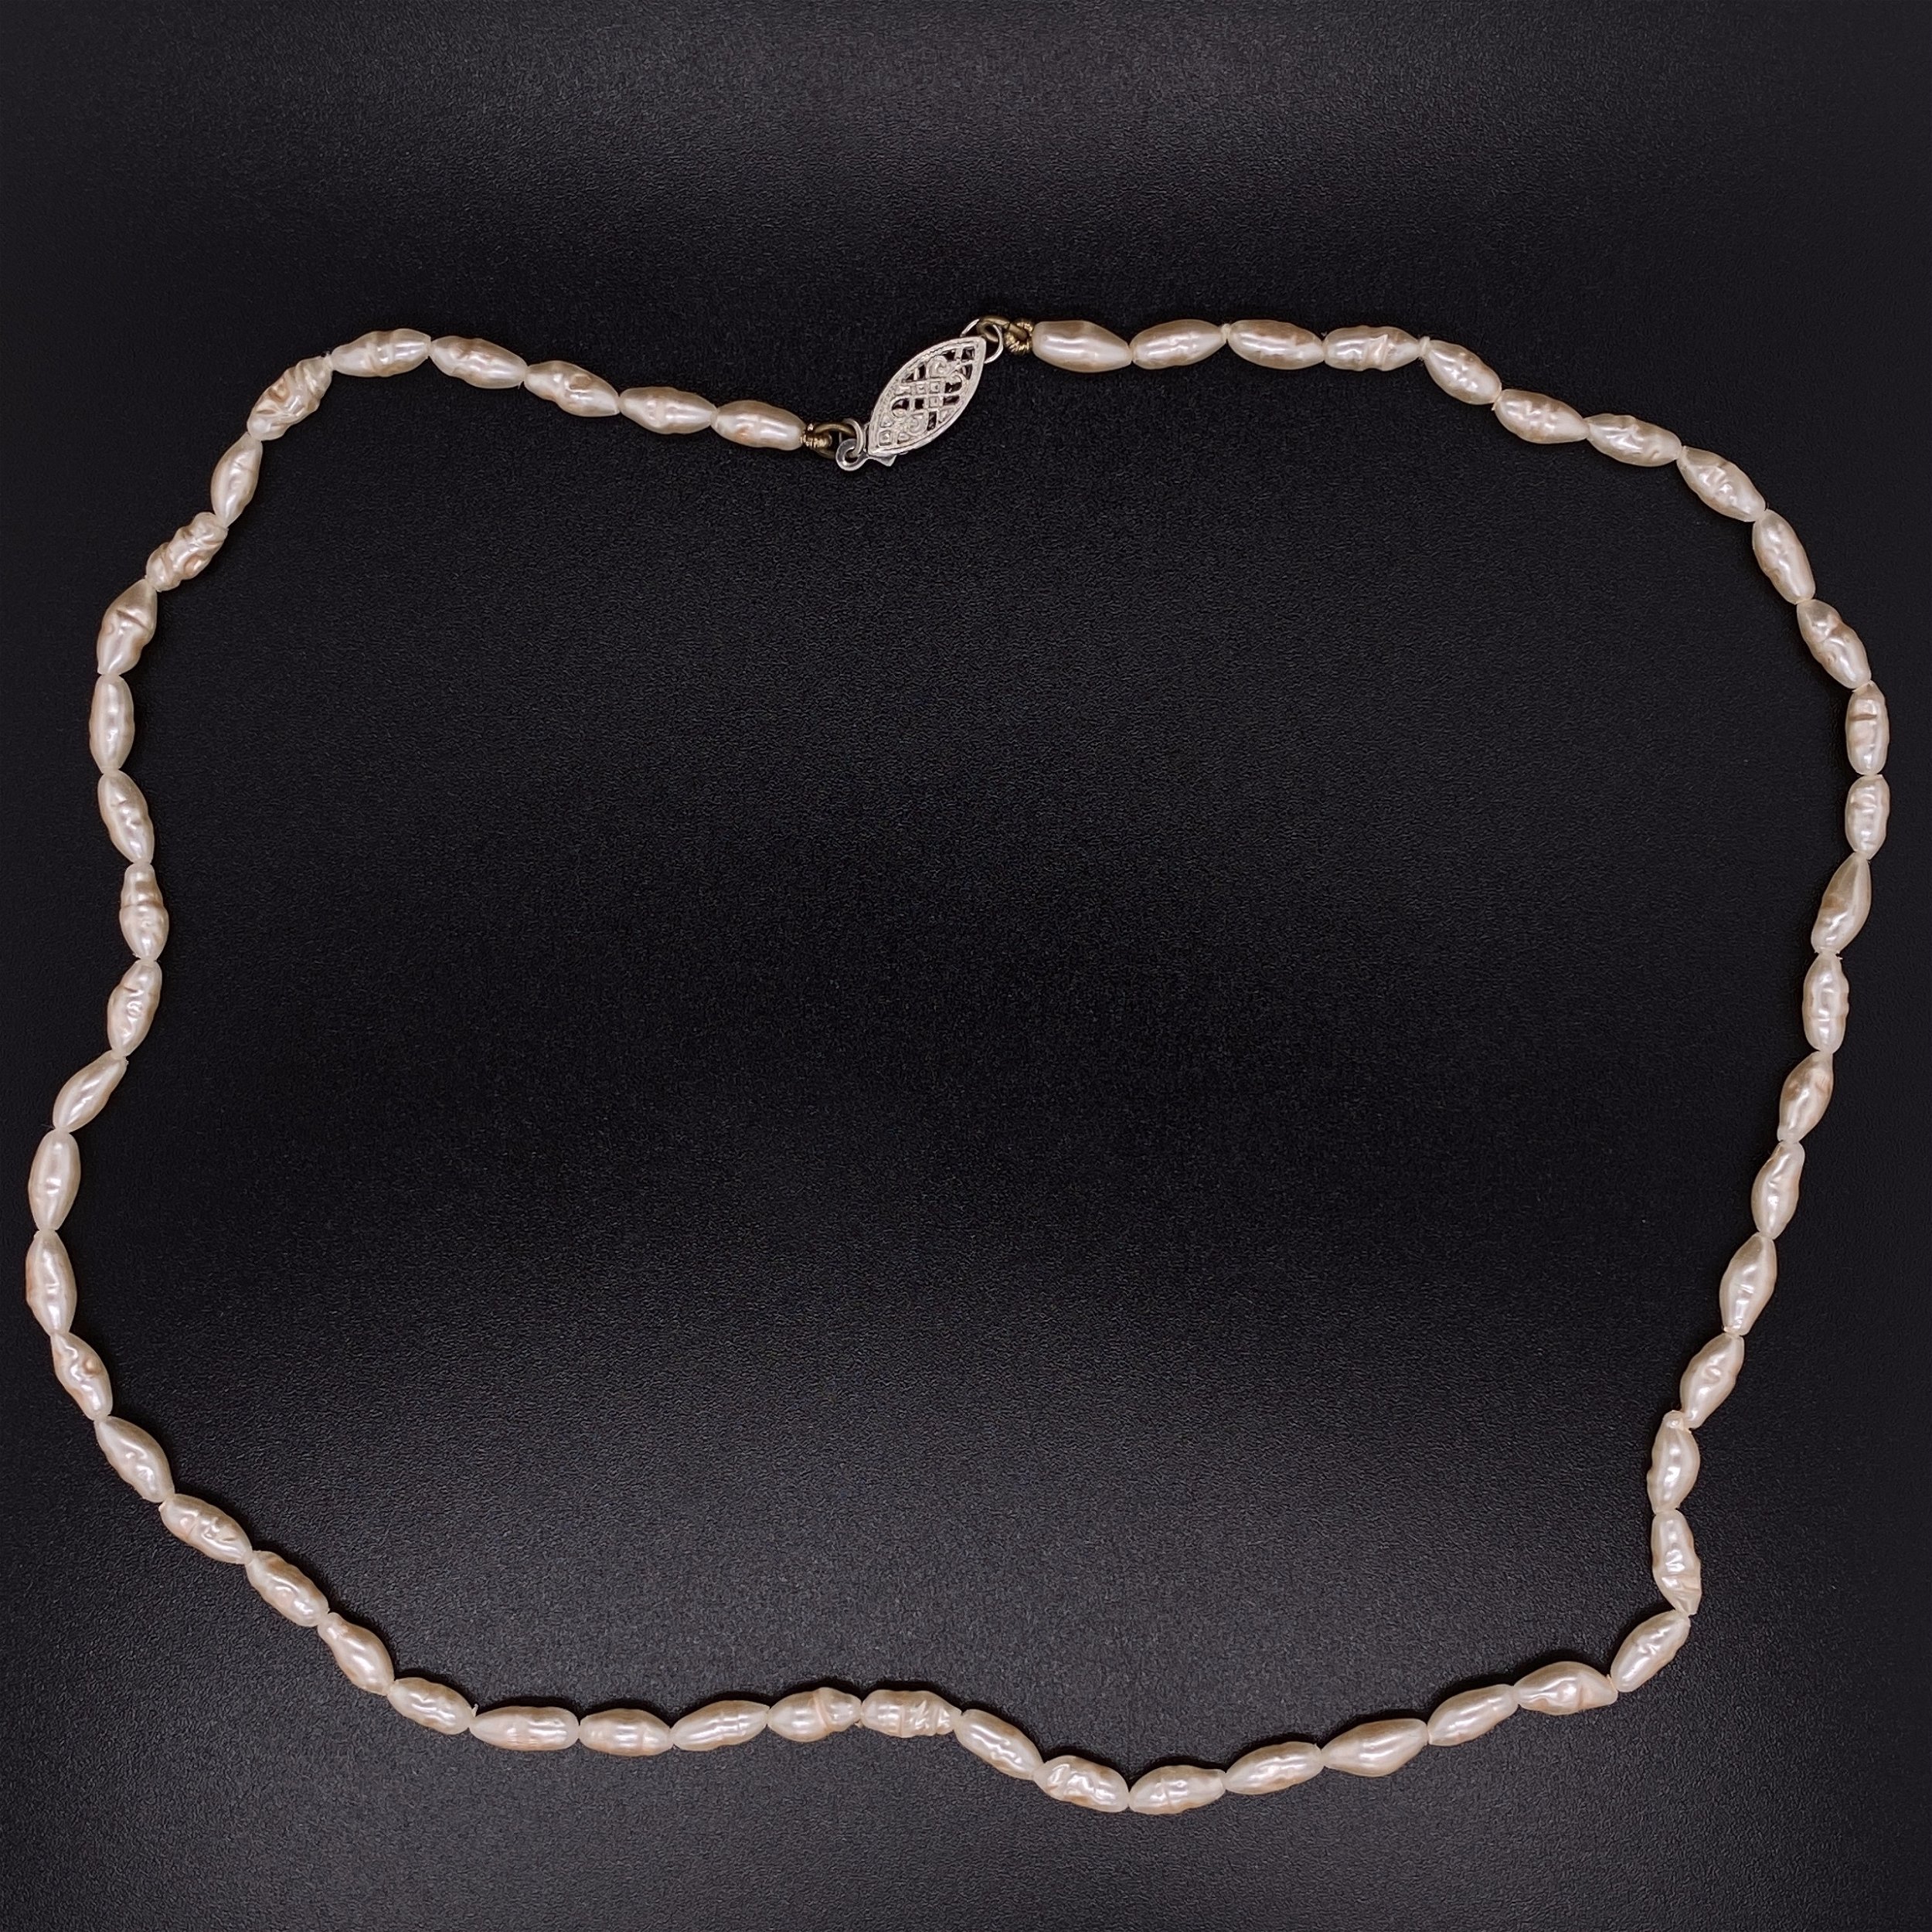 Single Strand Freshwater Pearl Necklace, 14K White Gold Clasp, 16"